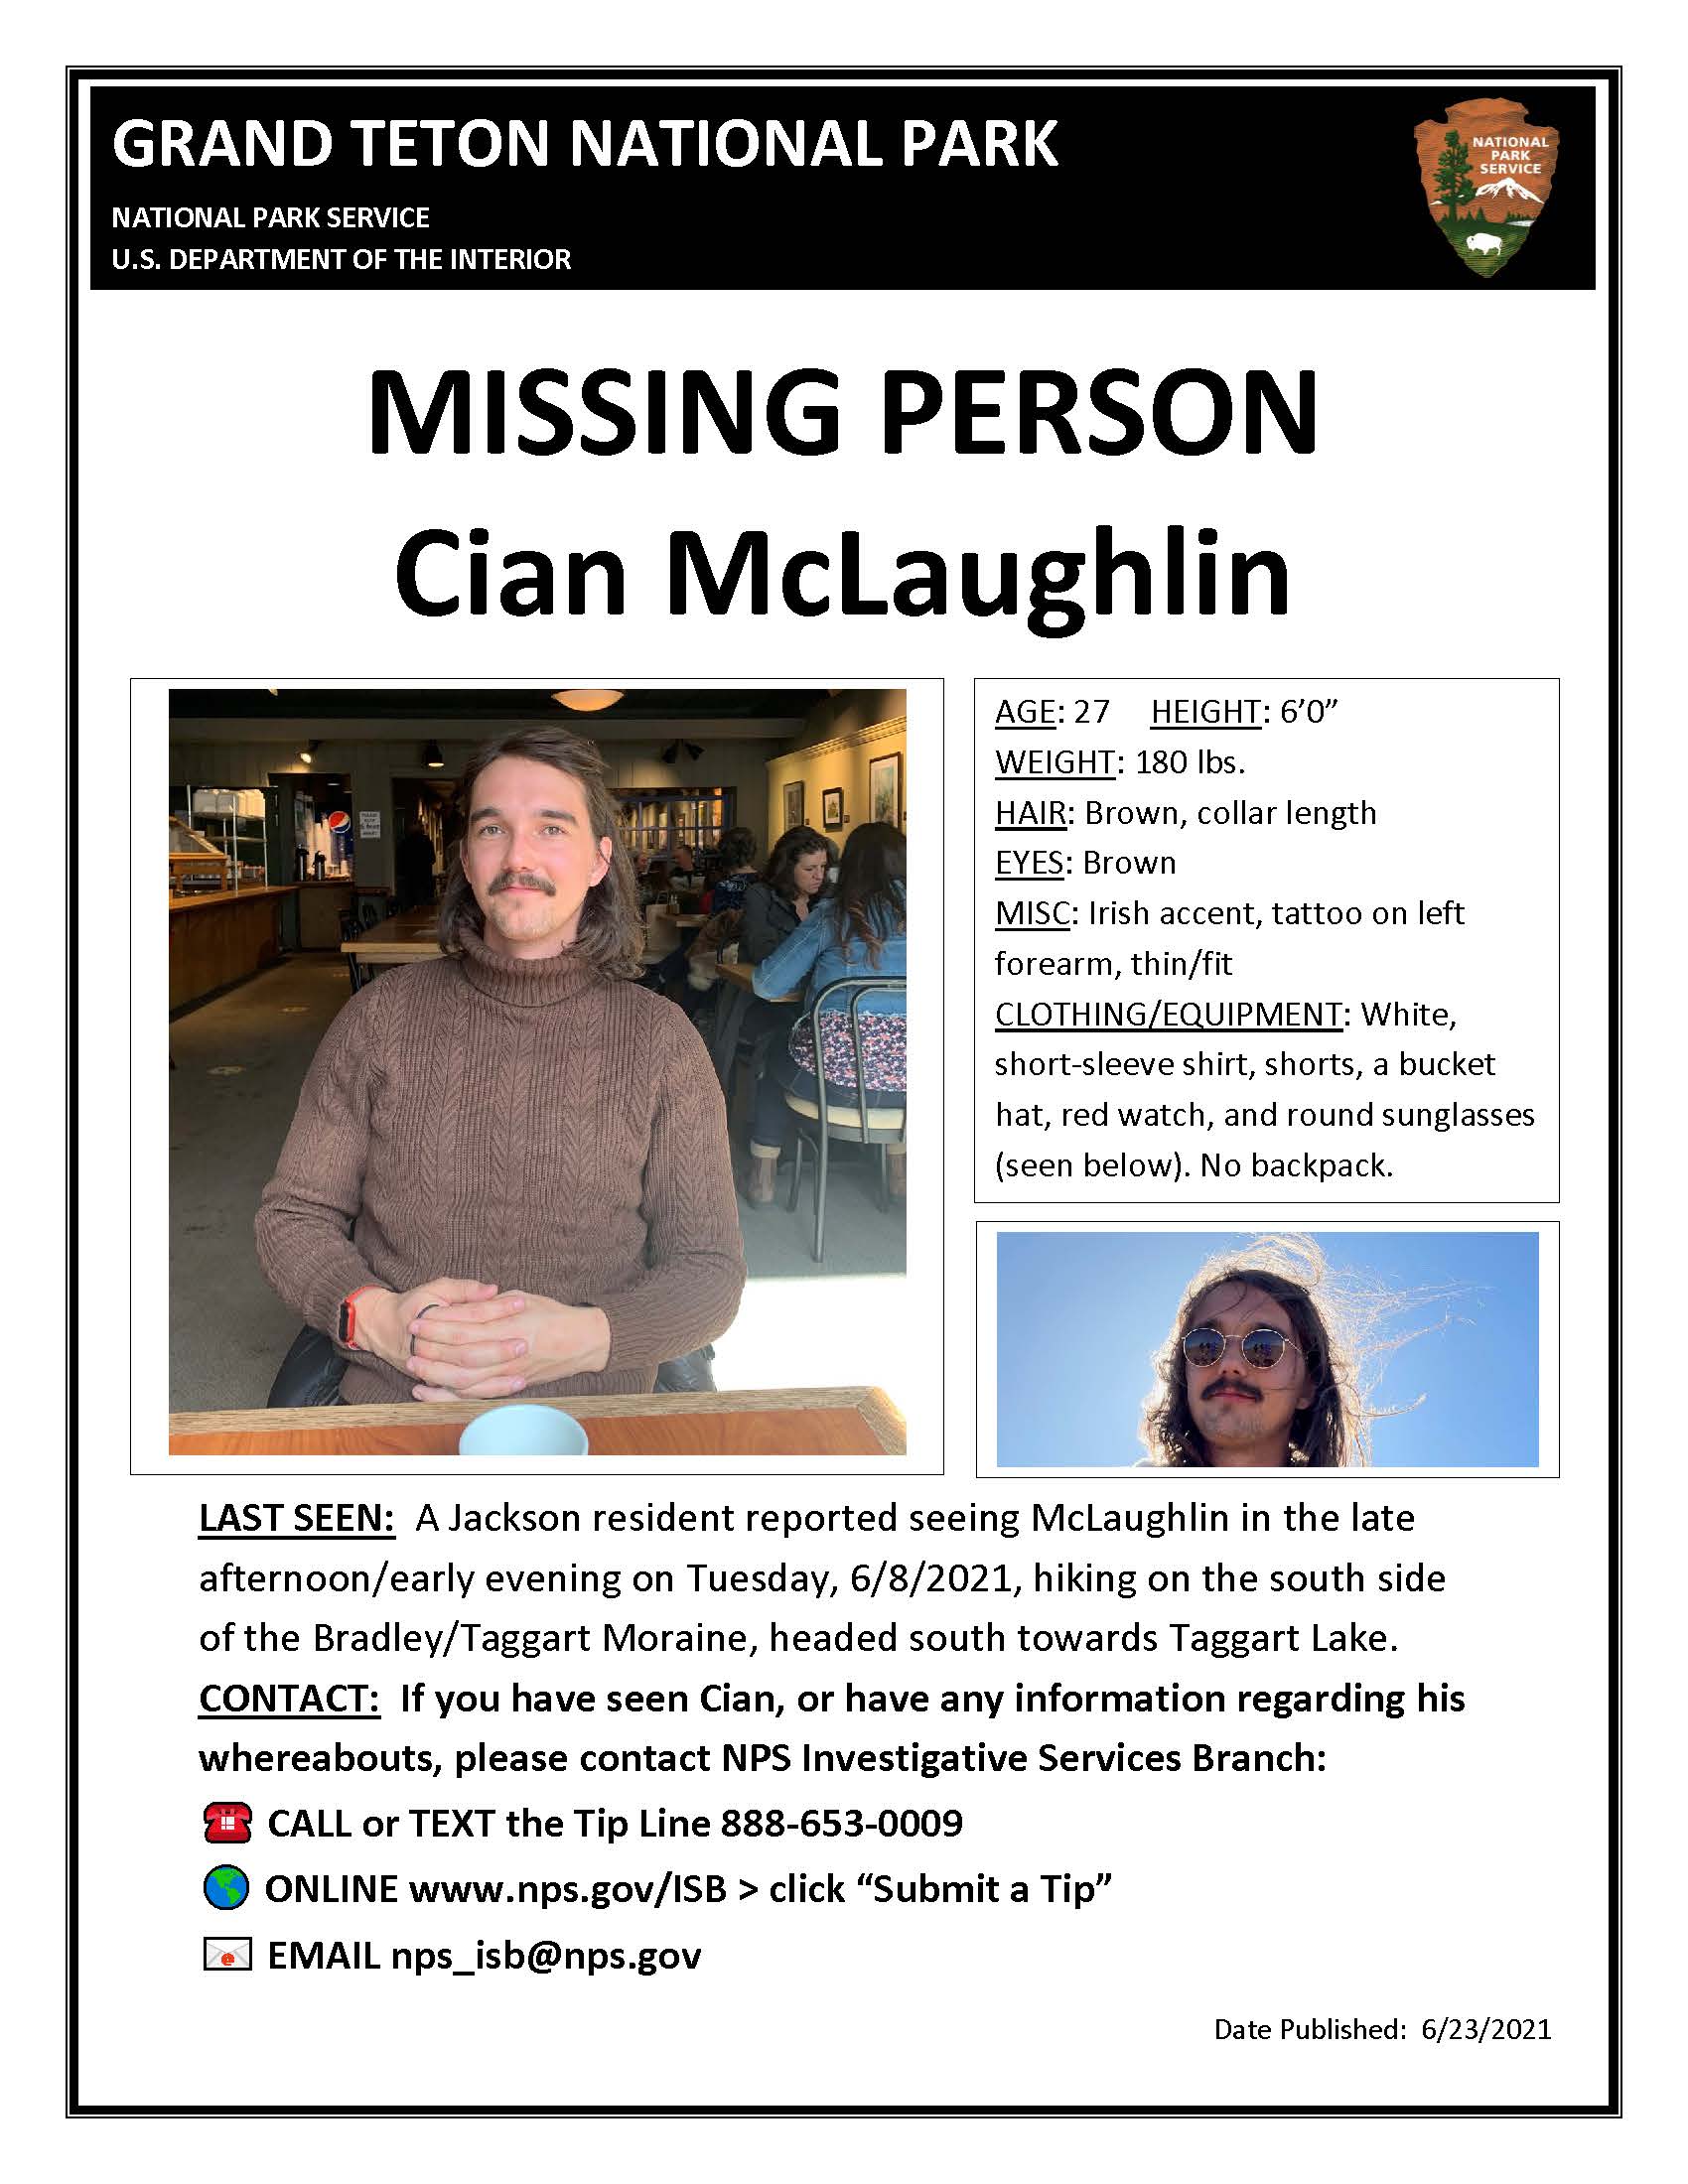 Missing Person Flyer Cian McLaughlin 6/23/2021